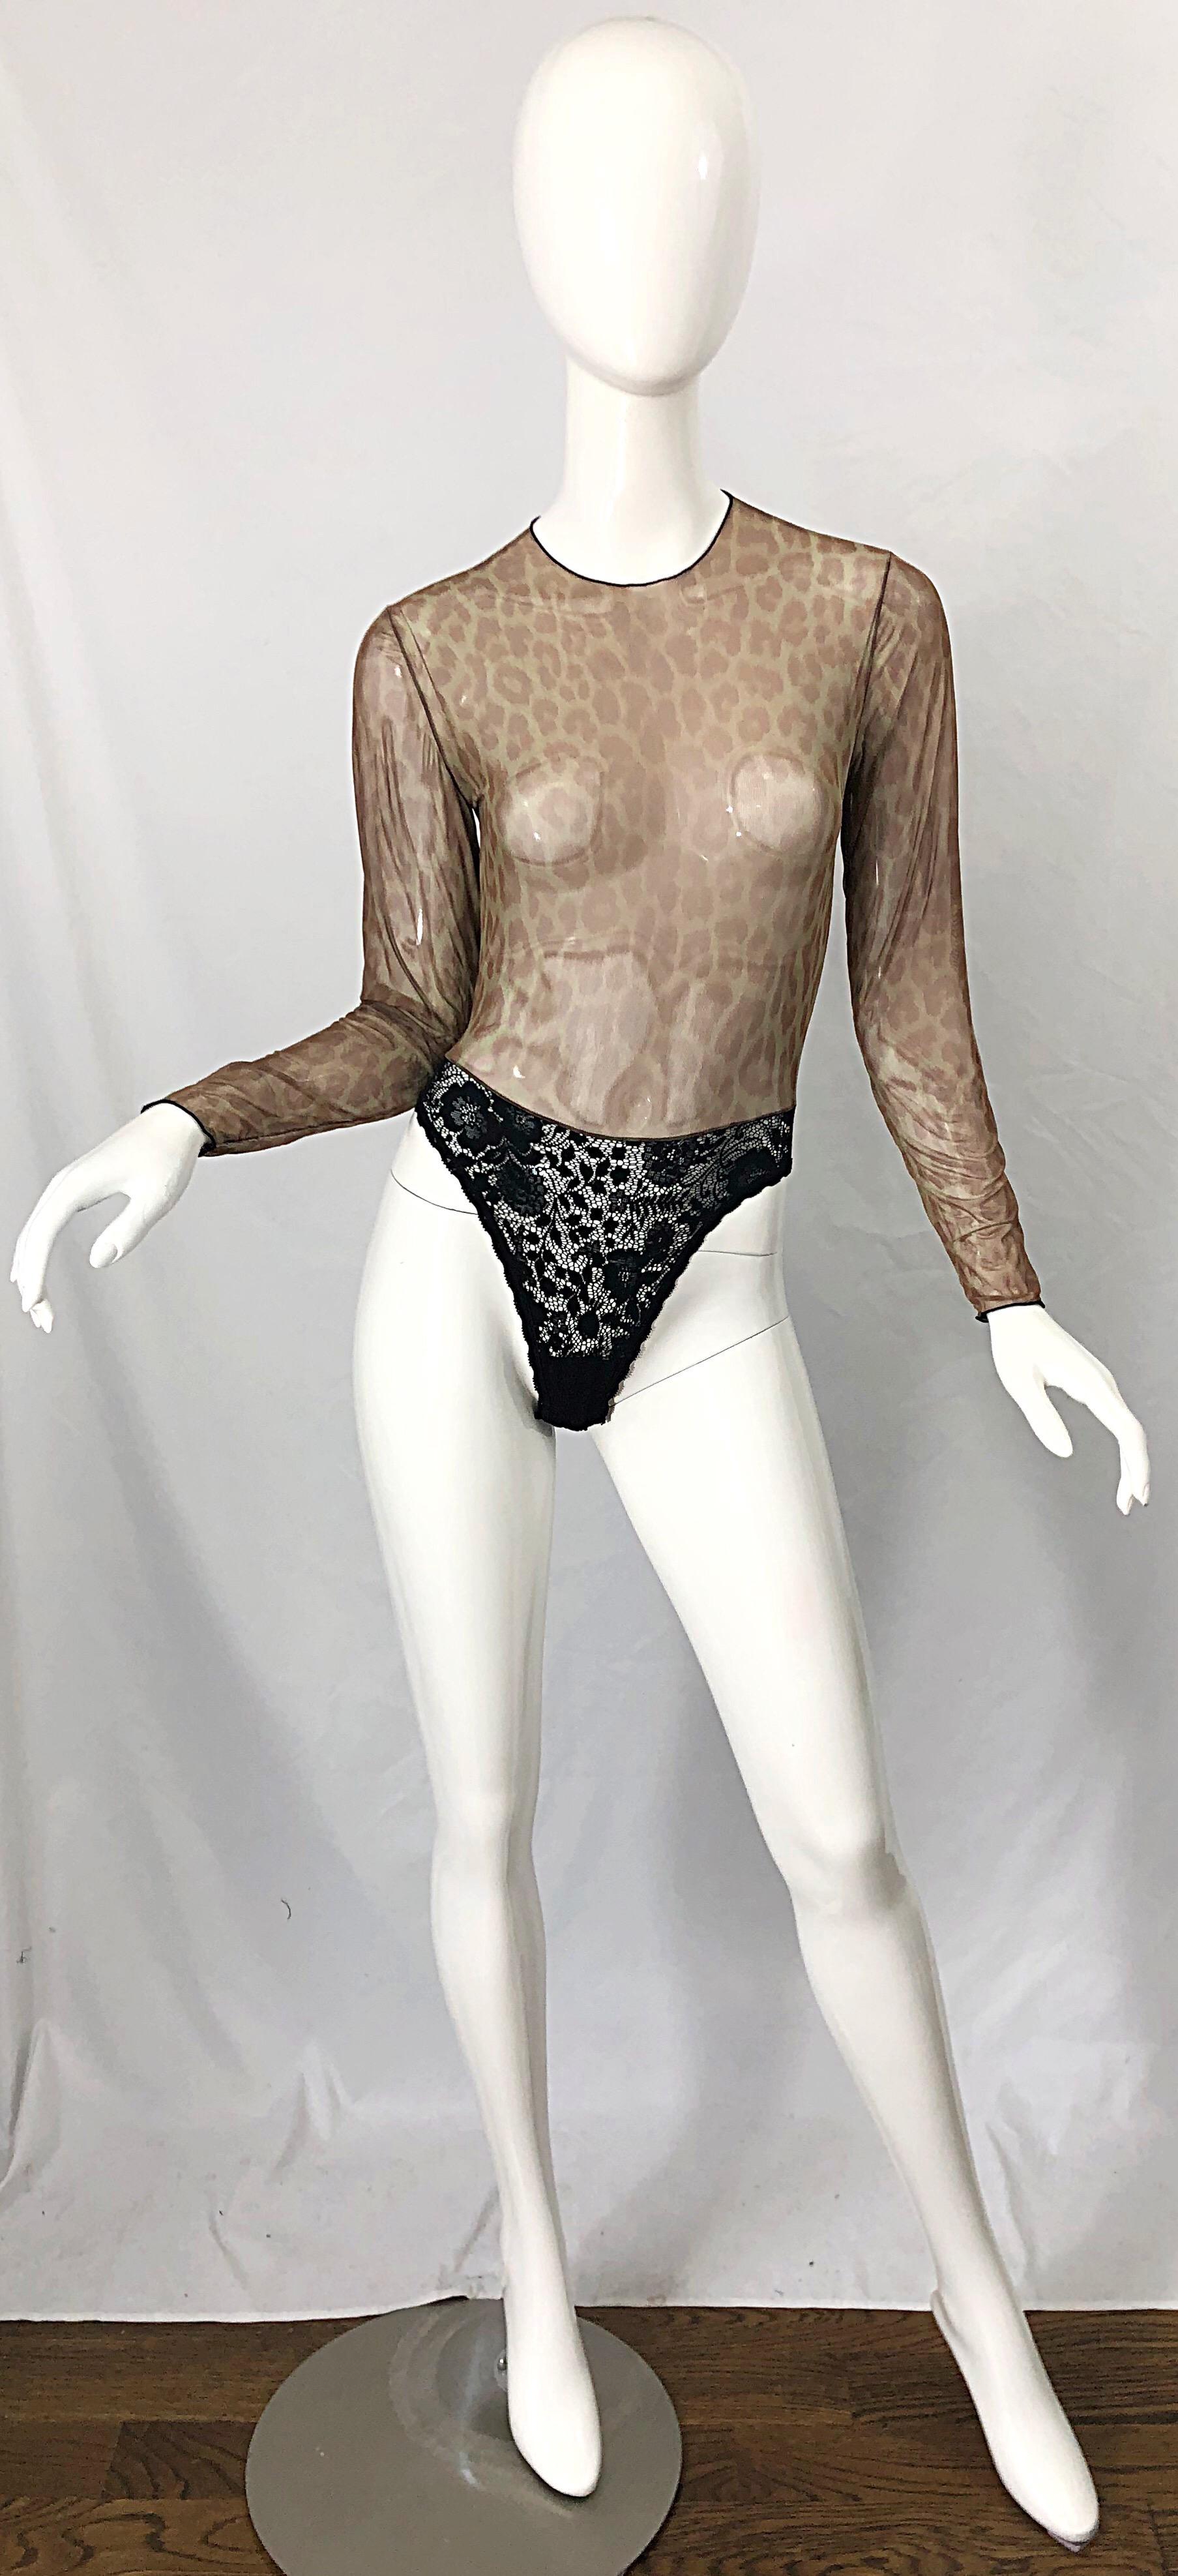 Sexy 1980s GUY LAROCHE semi sheer leopard animal print one piece mesh and lace bodysuit ! Features a classic leopard print in brown and tan. Button closure at center back neck. Can easily be dressed up or down. Pair with jeans, trousers, shorts, or